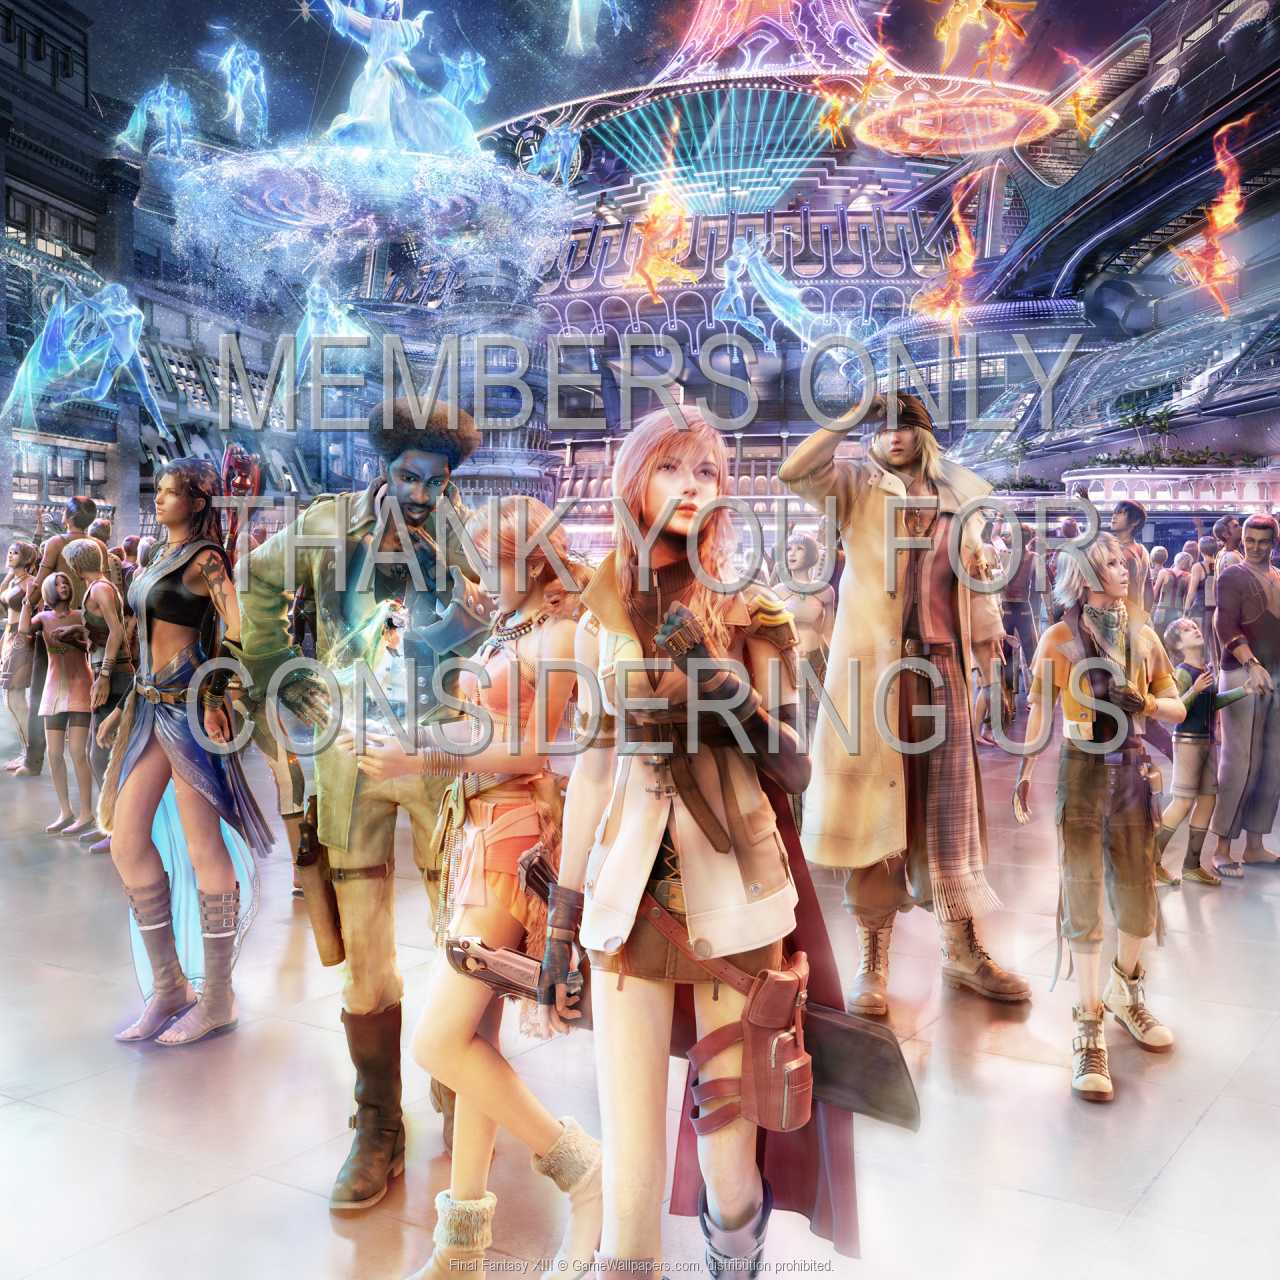 Final Fantasy XIII 720p Horizontal Mobile wallpaper or background 11